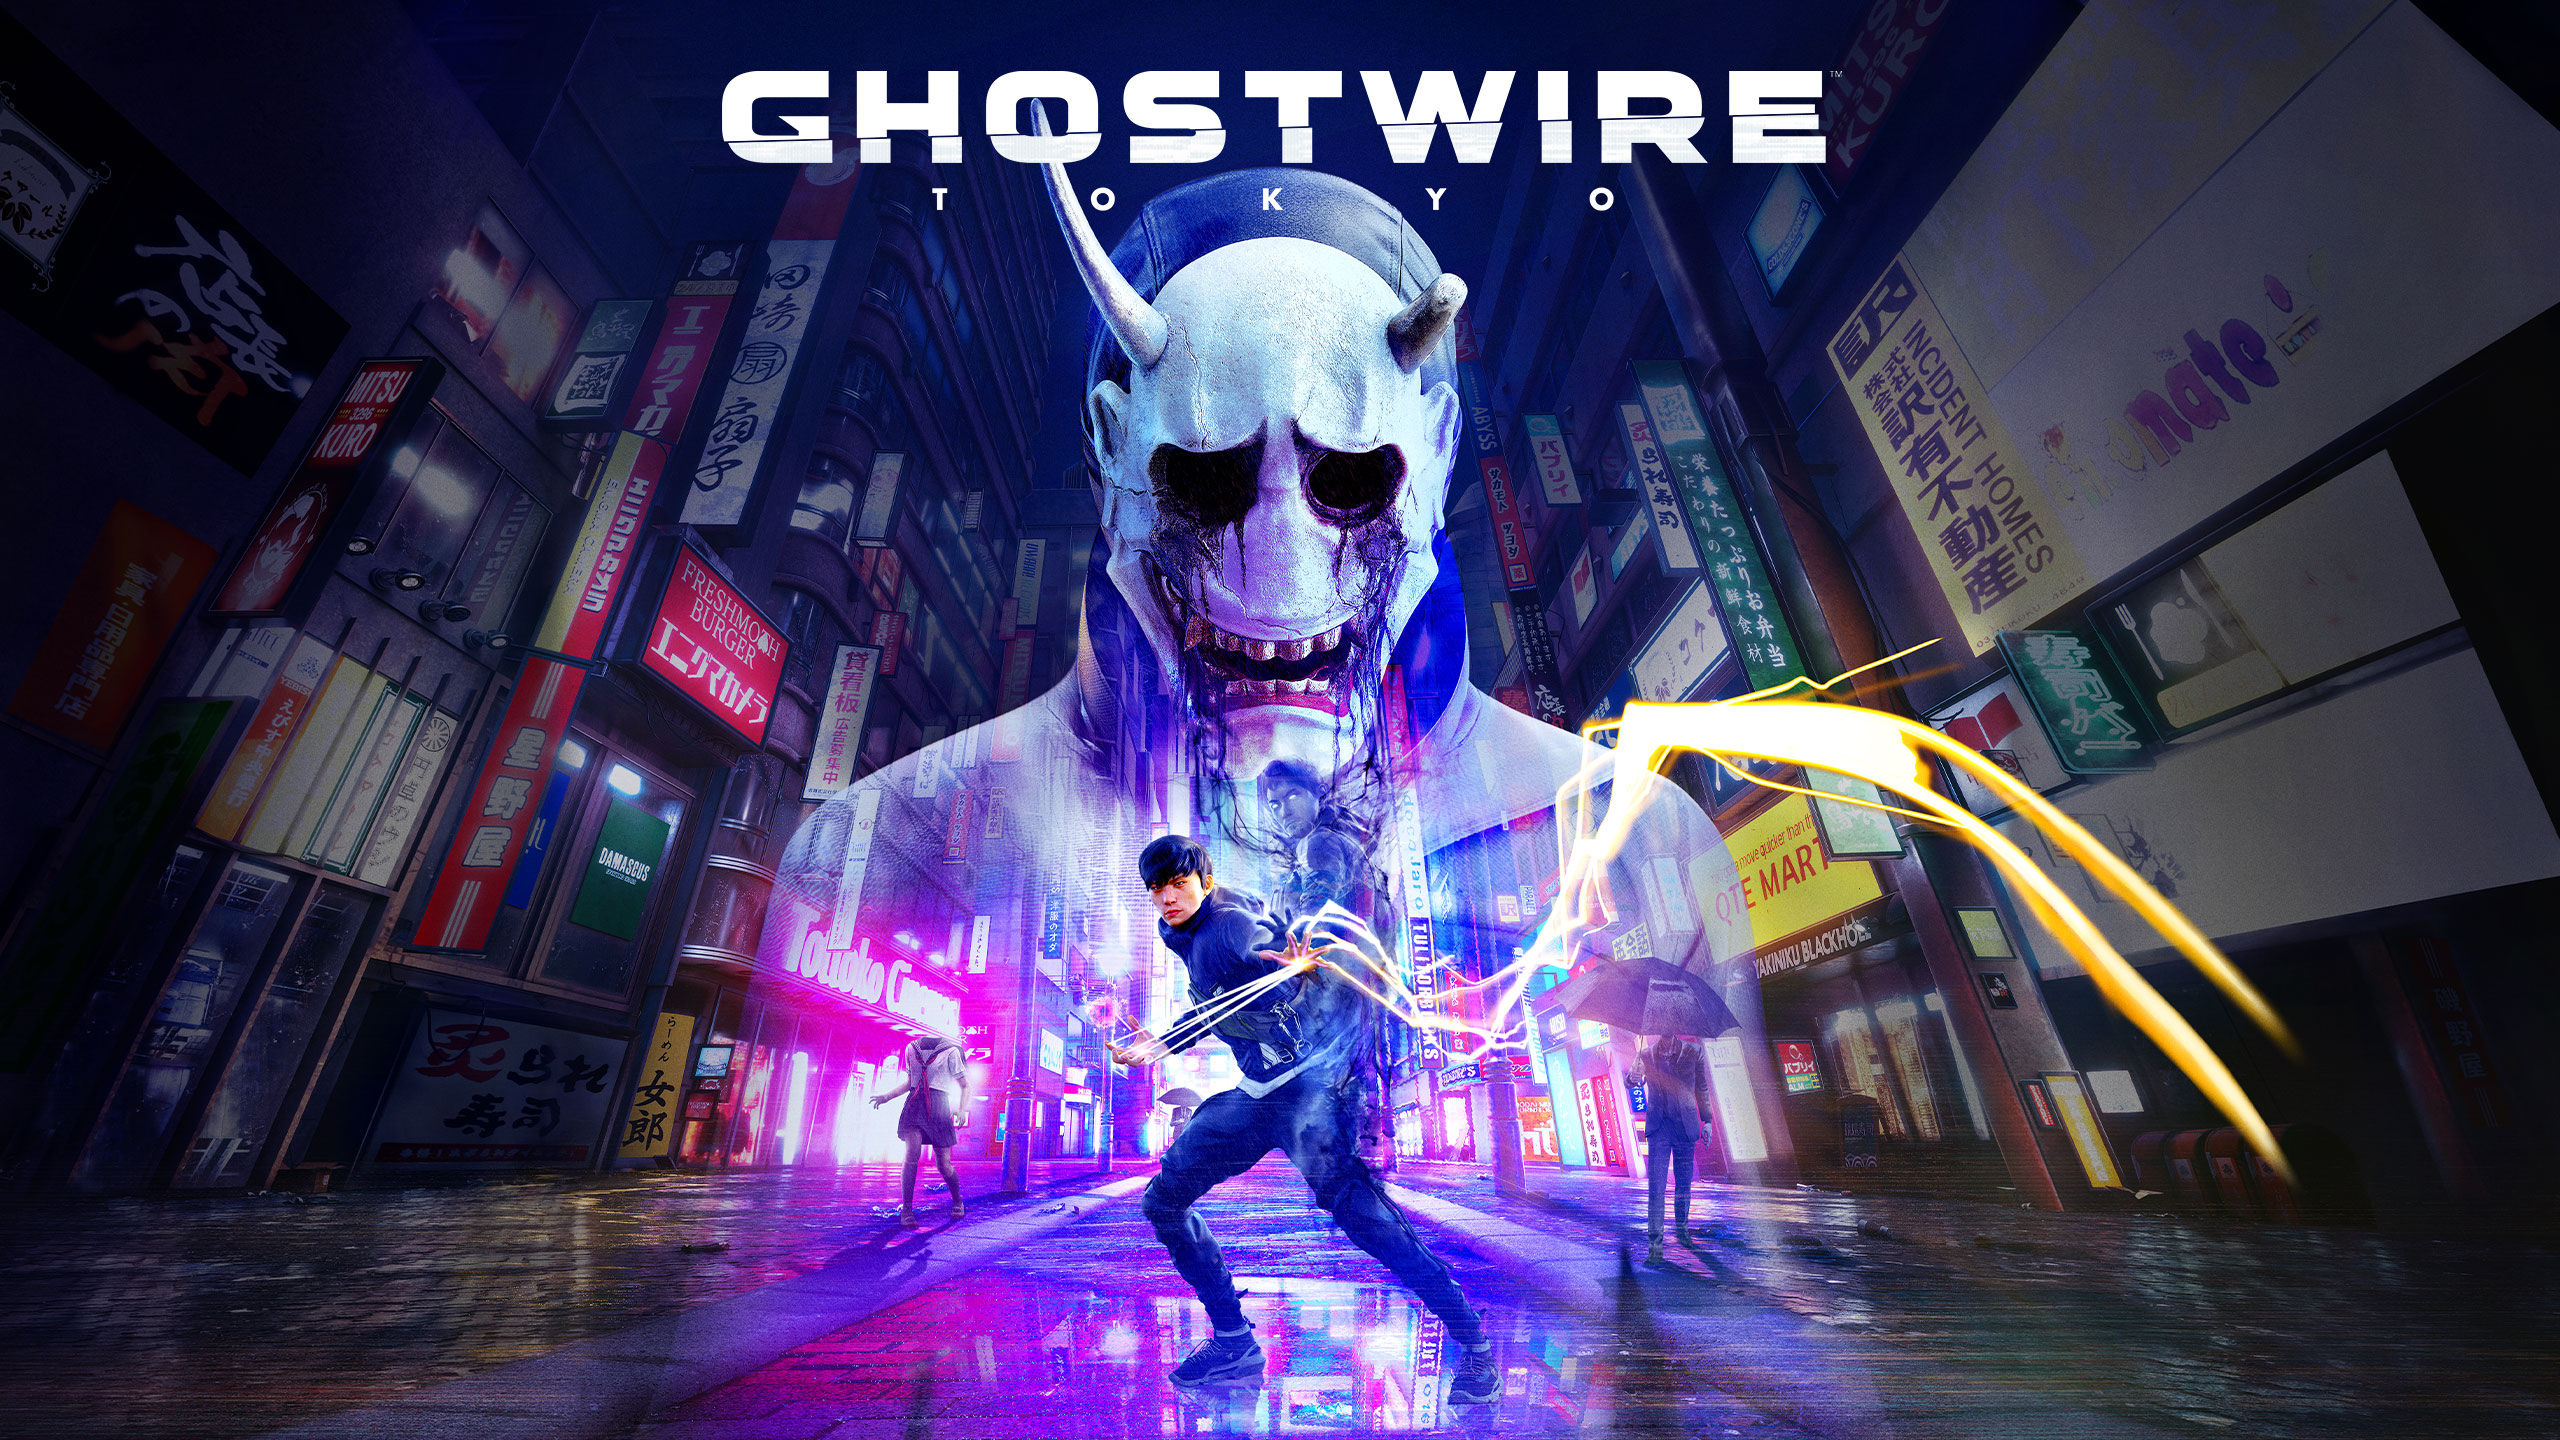 ‘Ghostwire: Tokyo’ Has So Much Going On, And I Love It – Review